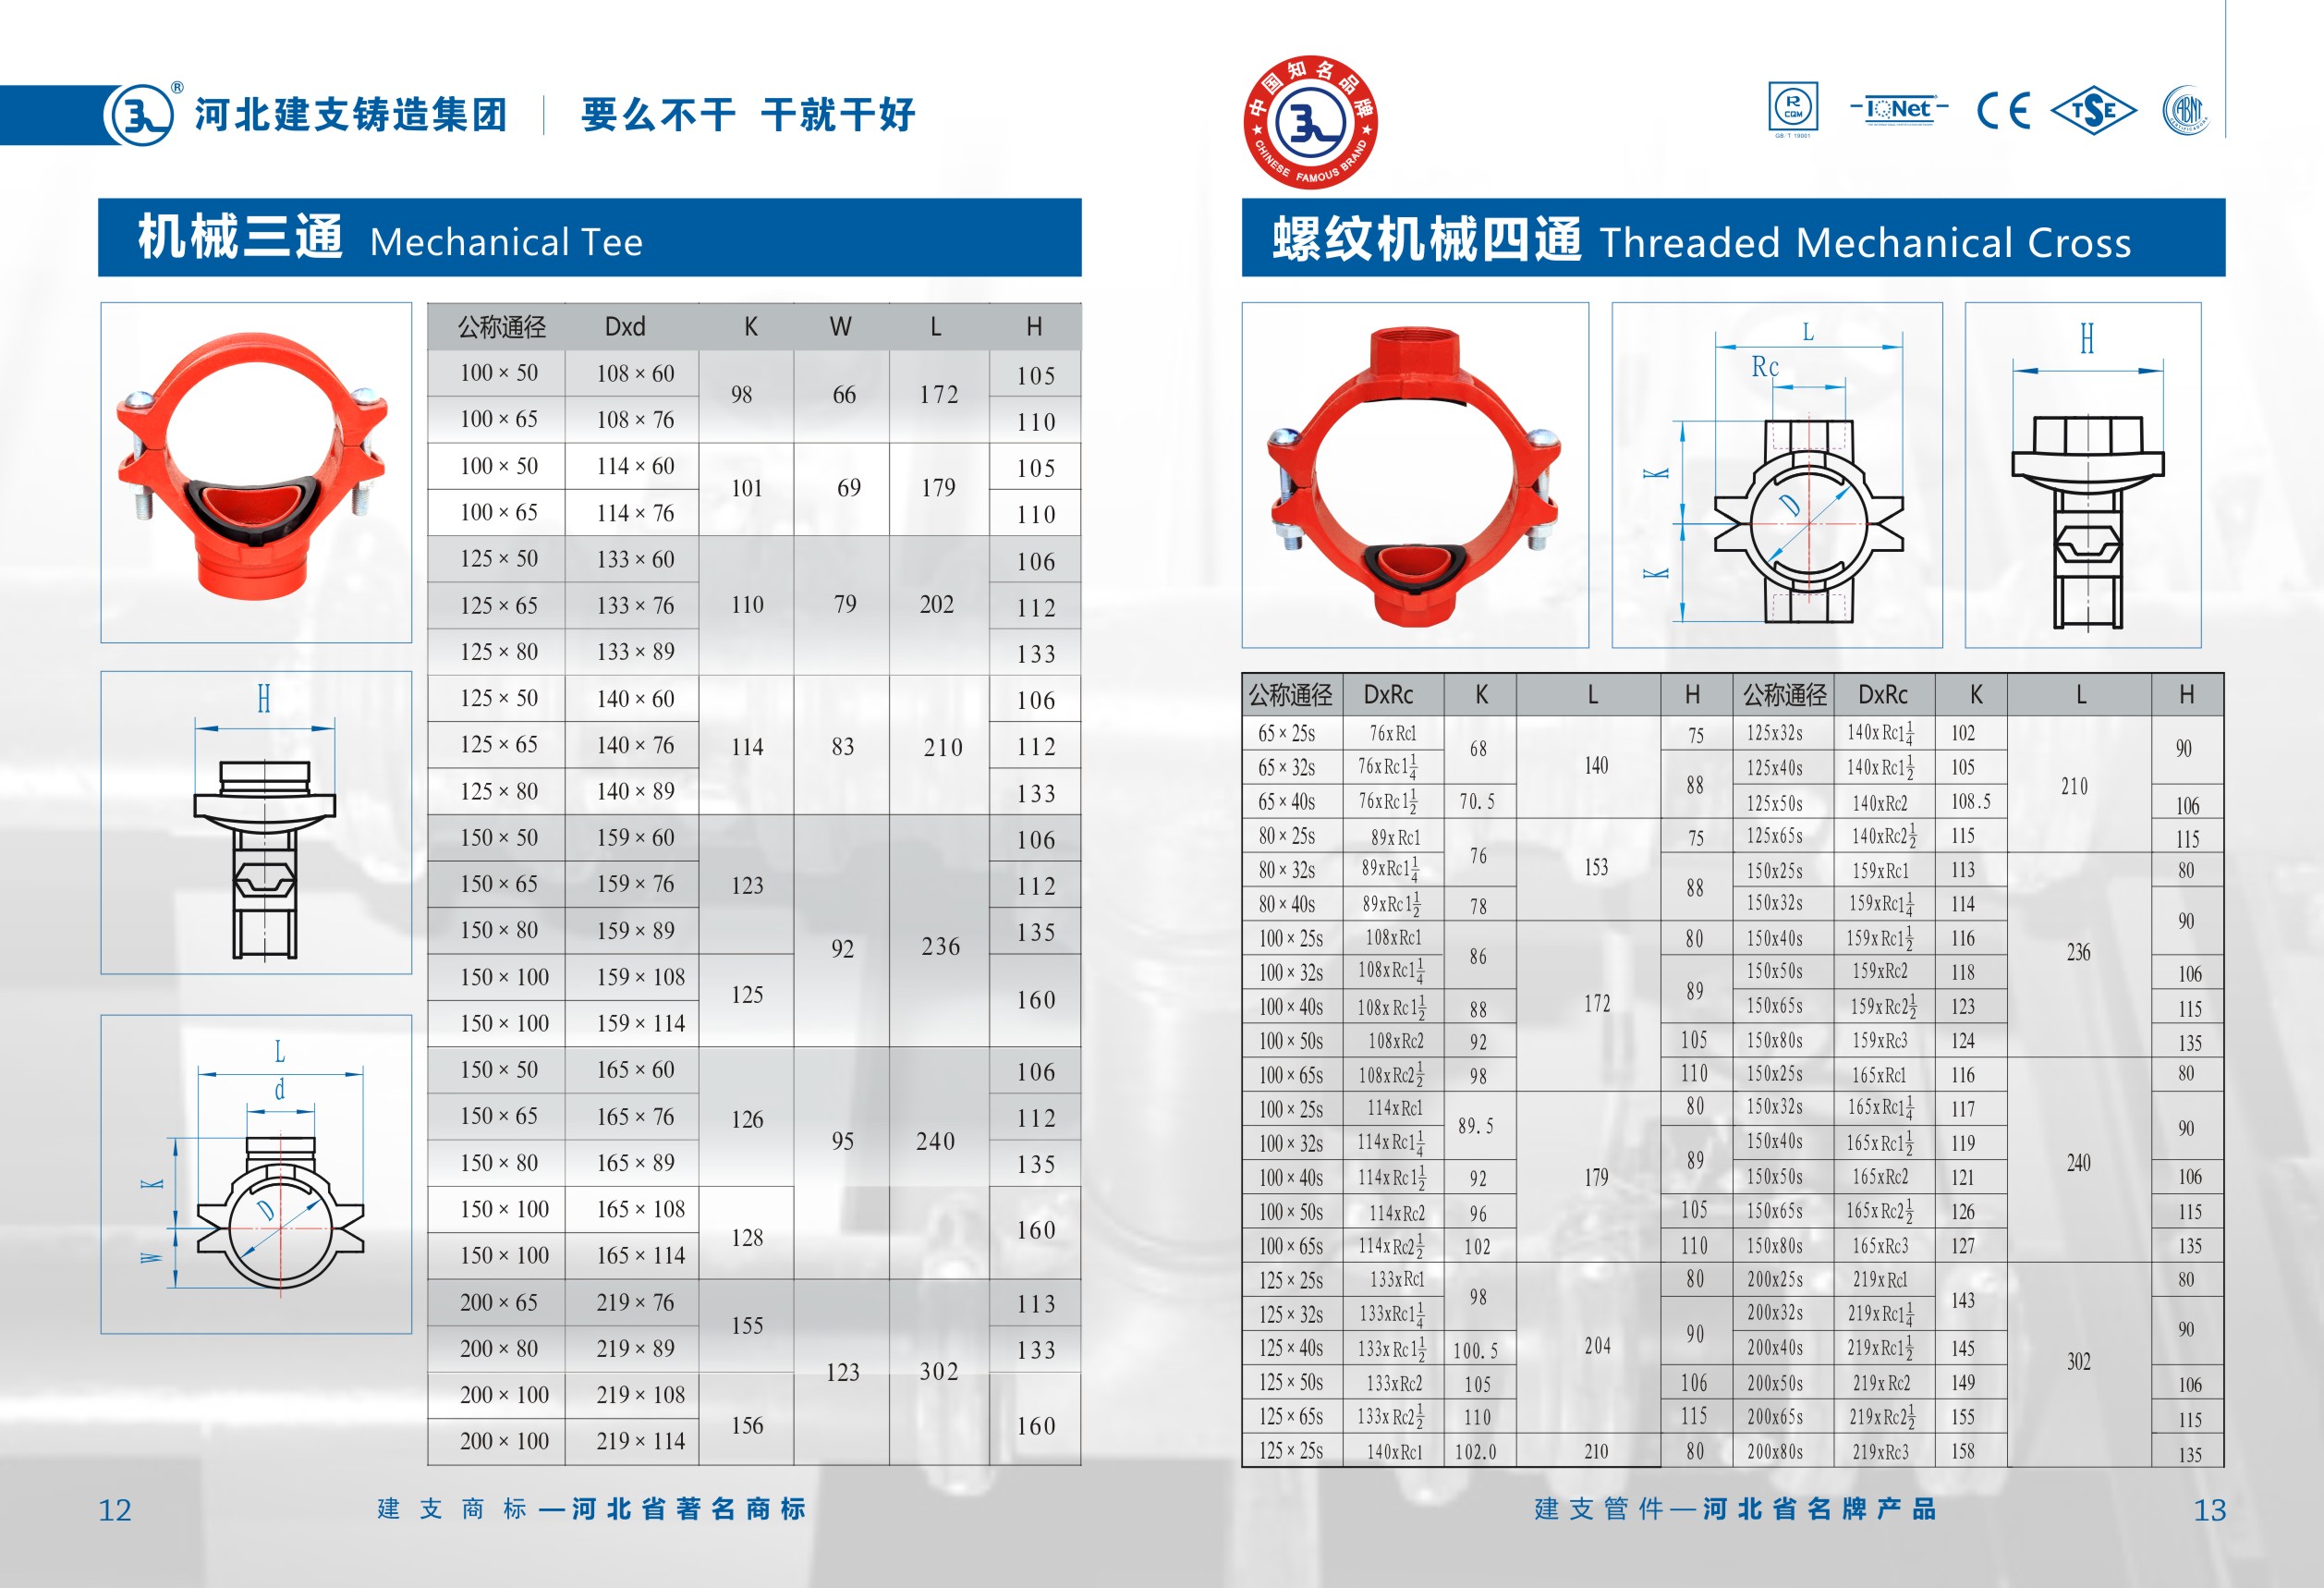 Manufacturer of ductile iron pipe fittings including elbows, tees, crosses, couplings, plugs, unions and nipples. Virtual designing, construction, engineering, field, support and repair services are also provided. Serves the mechanical, plumbing system, energy, power, oil,